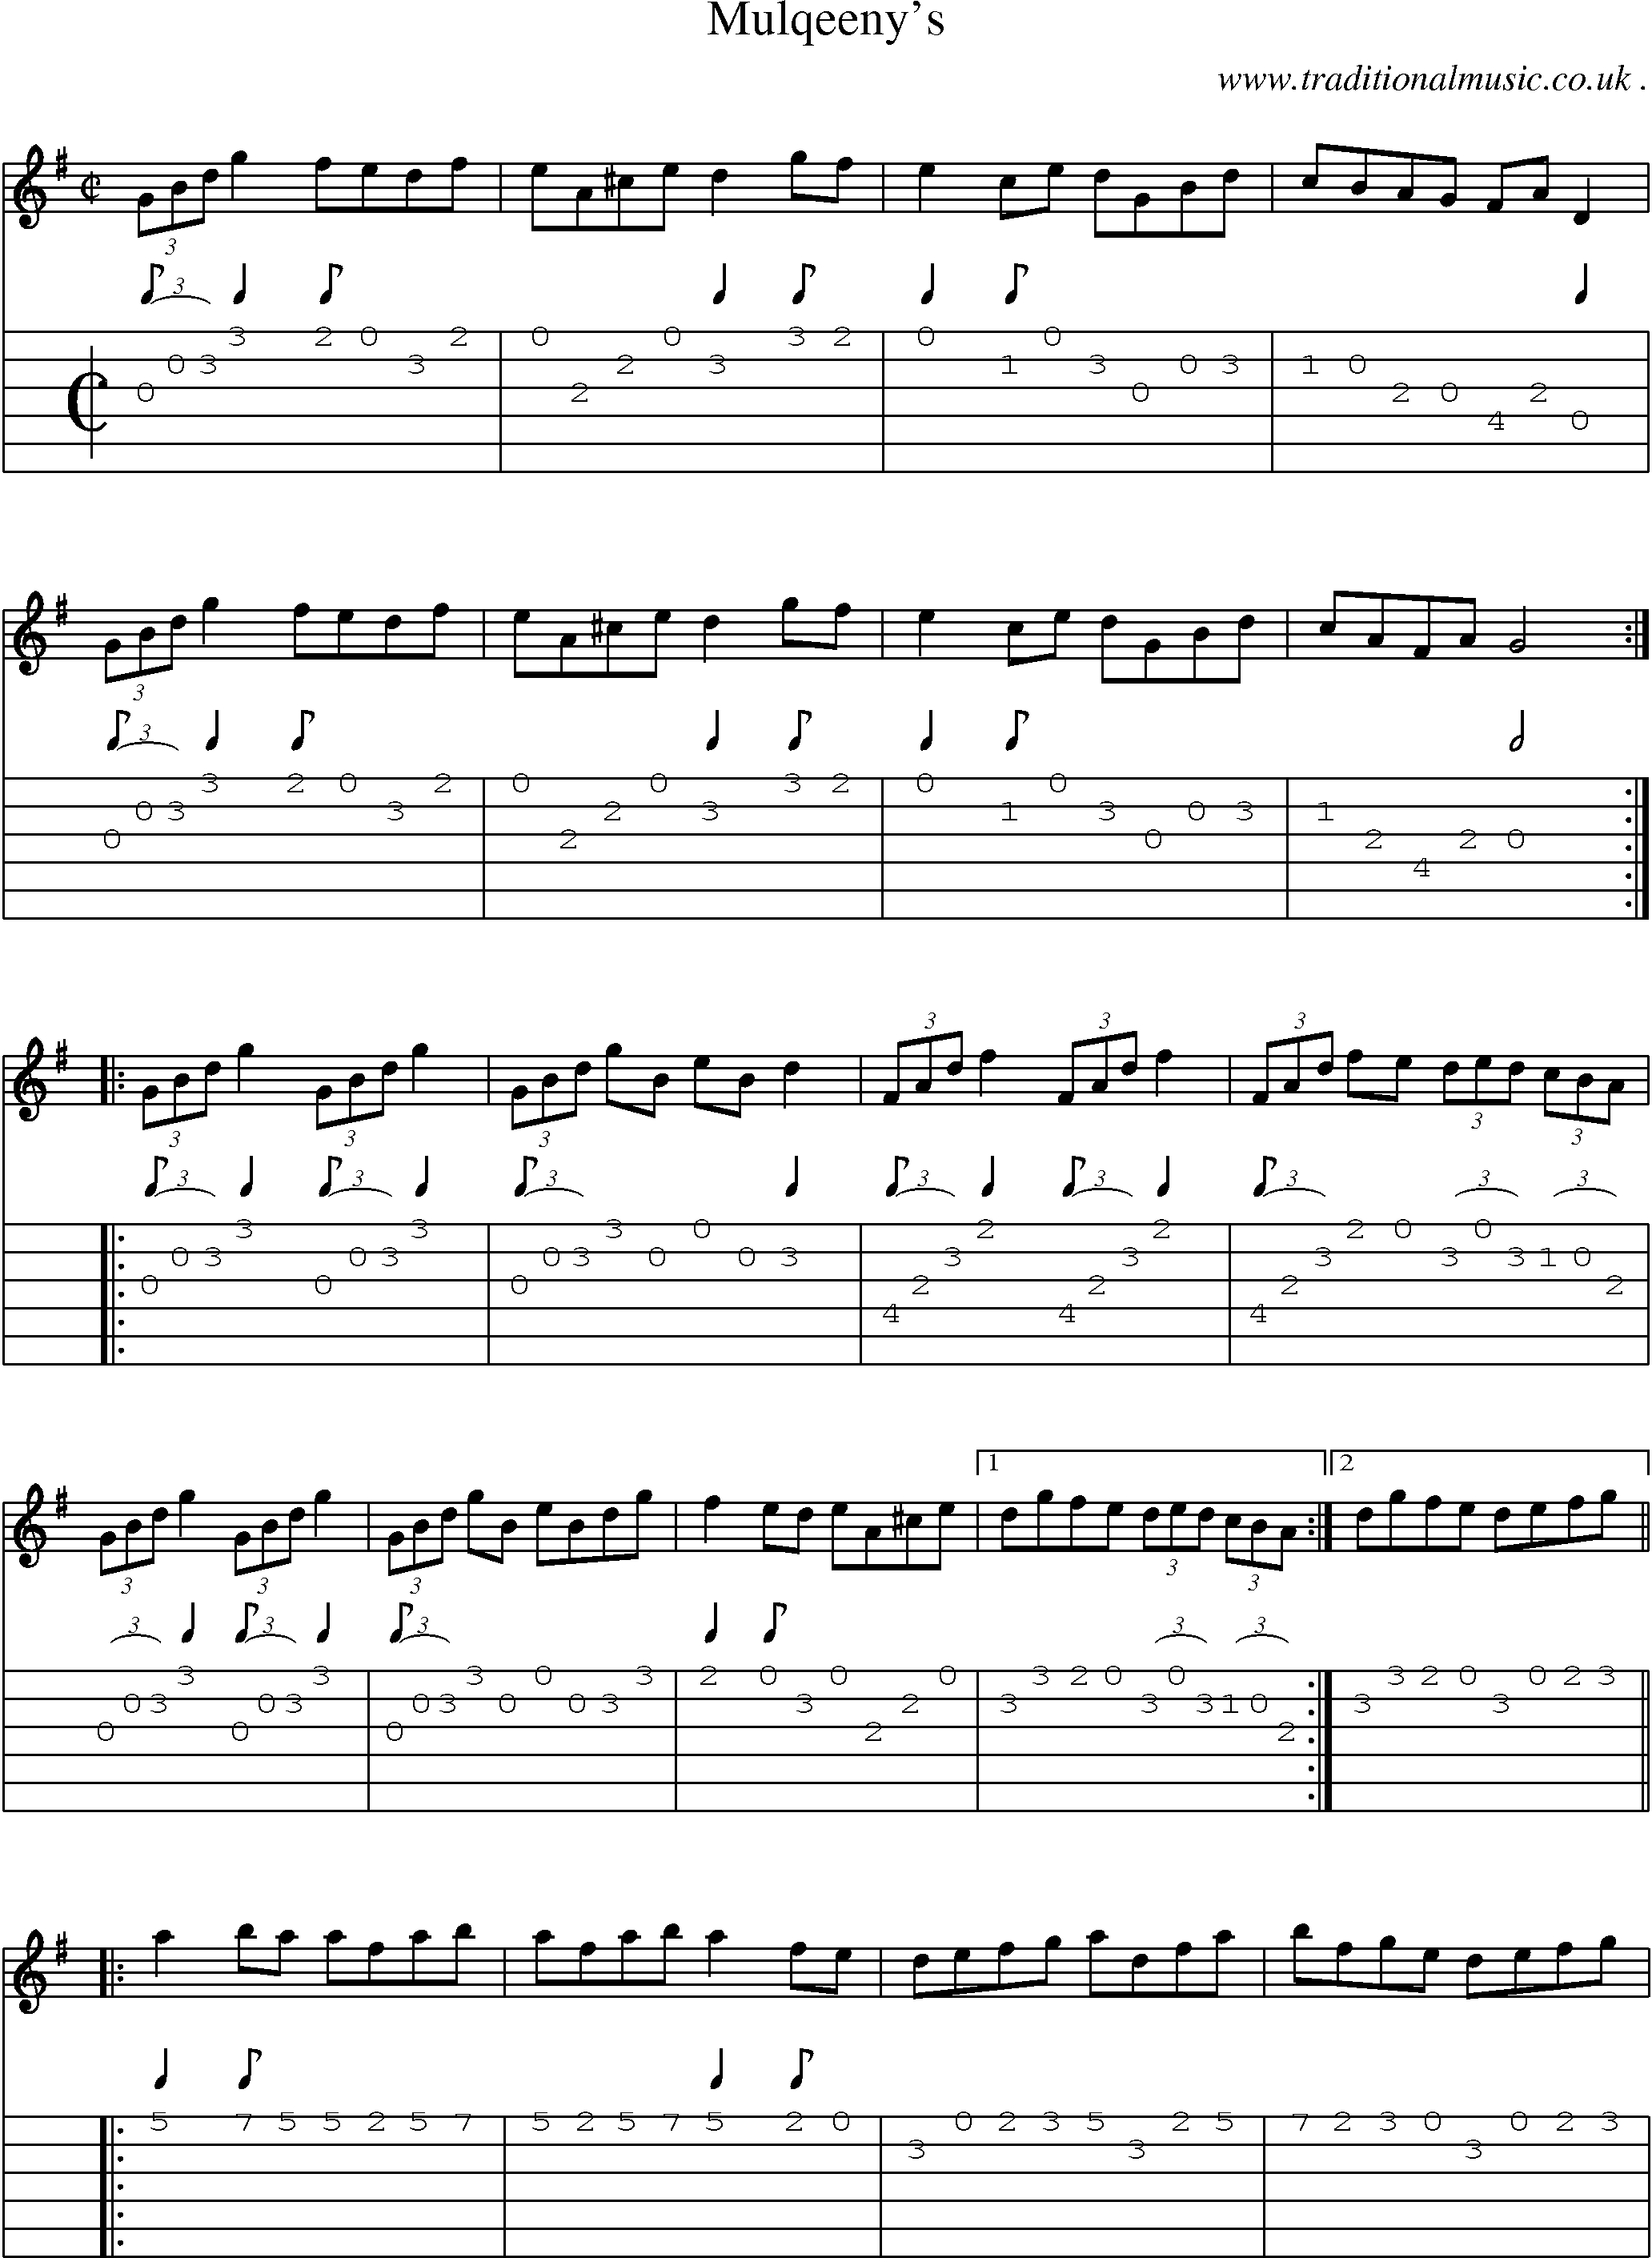 Sheet-Music and Guitar Tabs for Mulqeenys